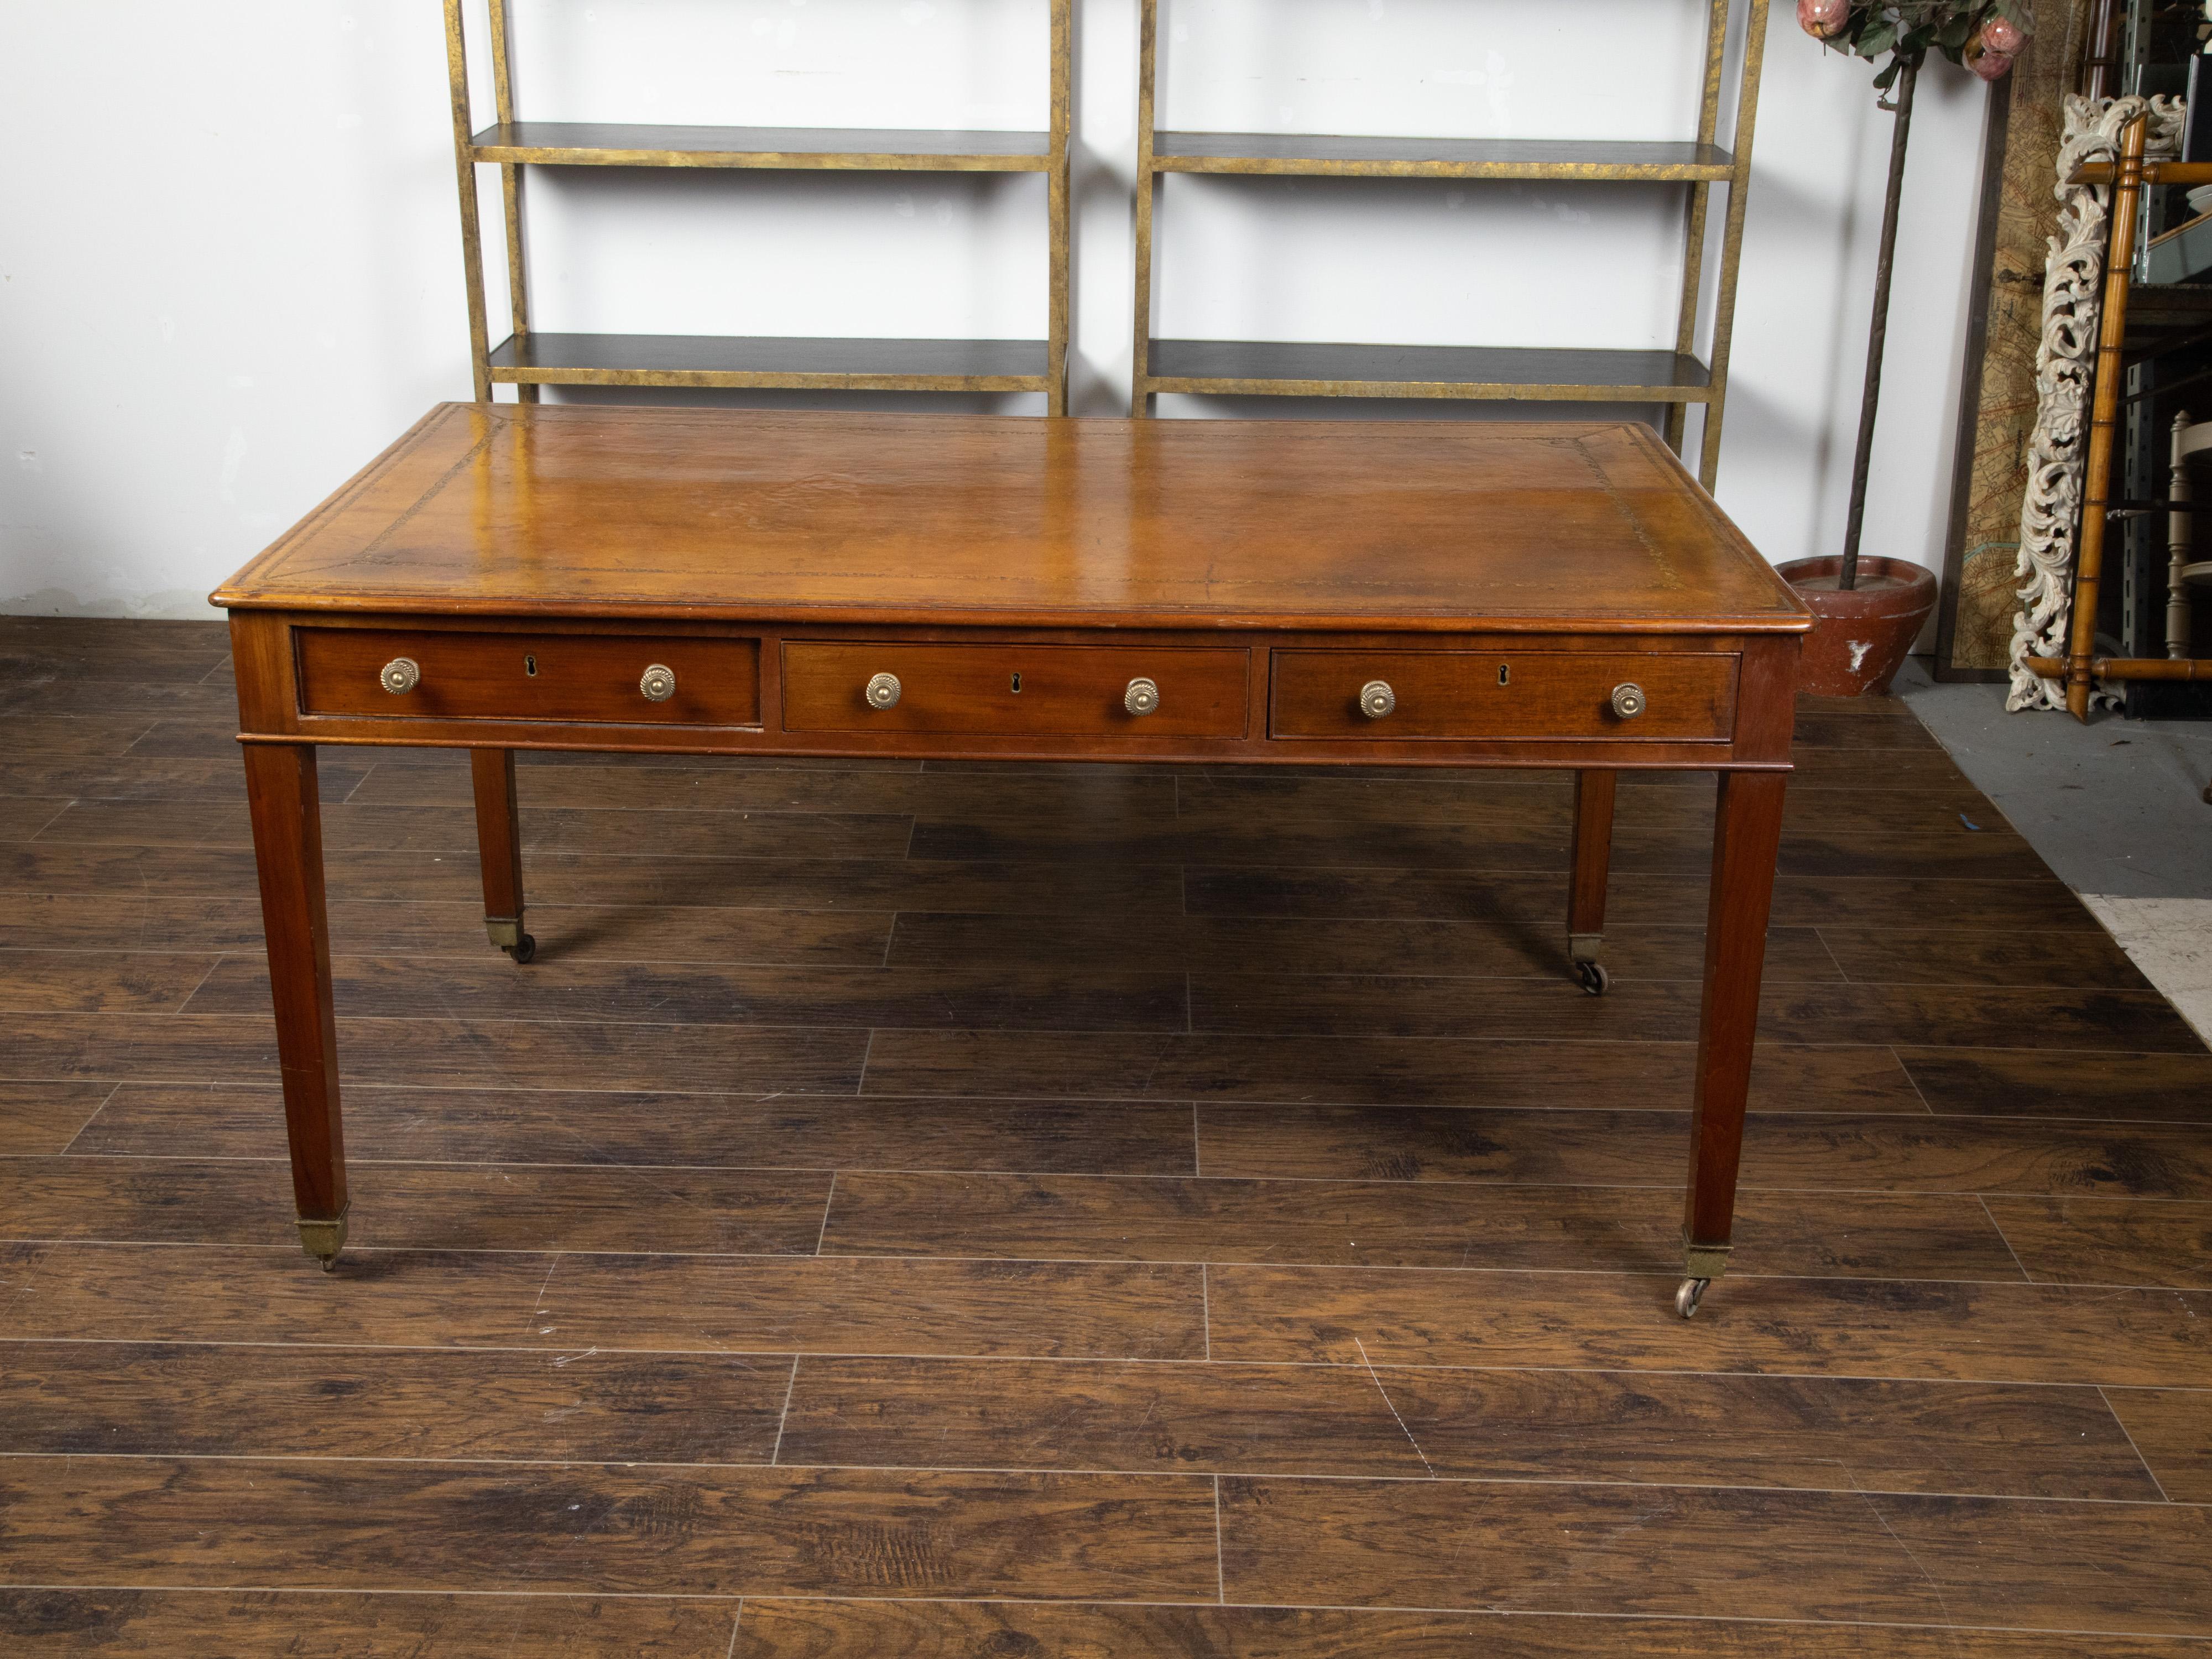 English 19th Century Mahogany Desk with Three Drawers, Mounted on Brass Casters 3